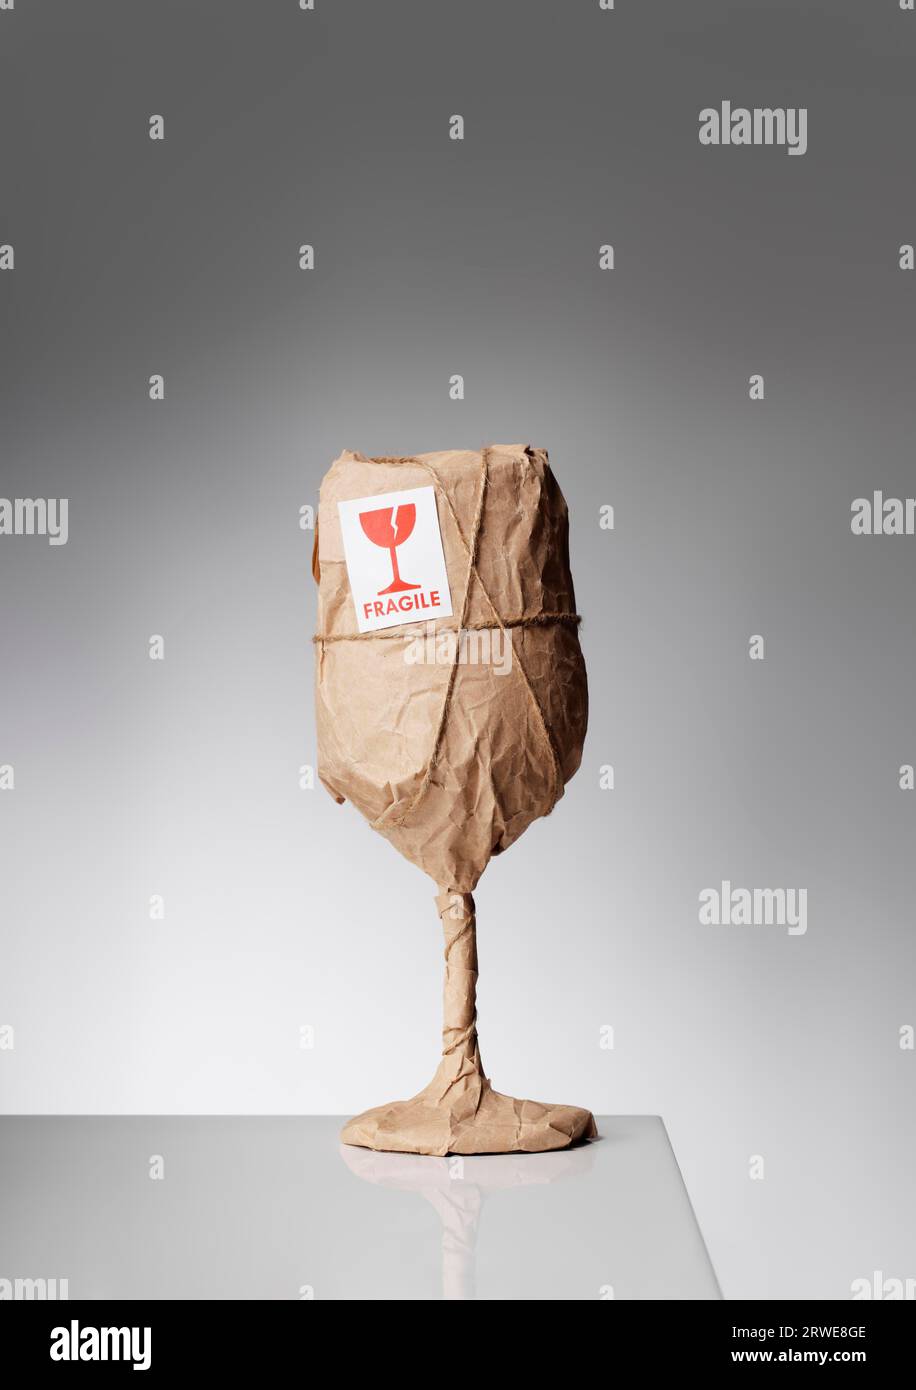 An obviously fragile object wrapped in paper and with a fragile sticker Stock Photo